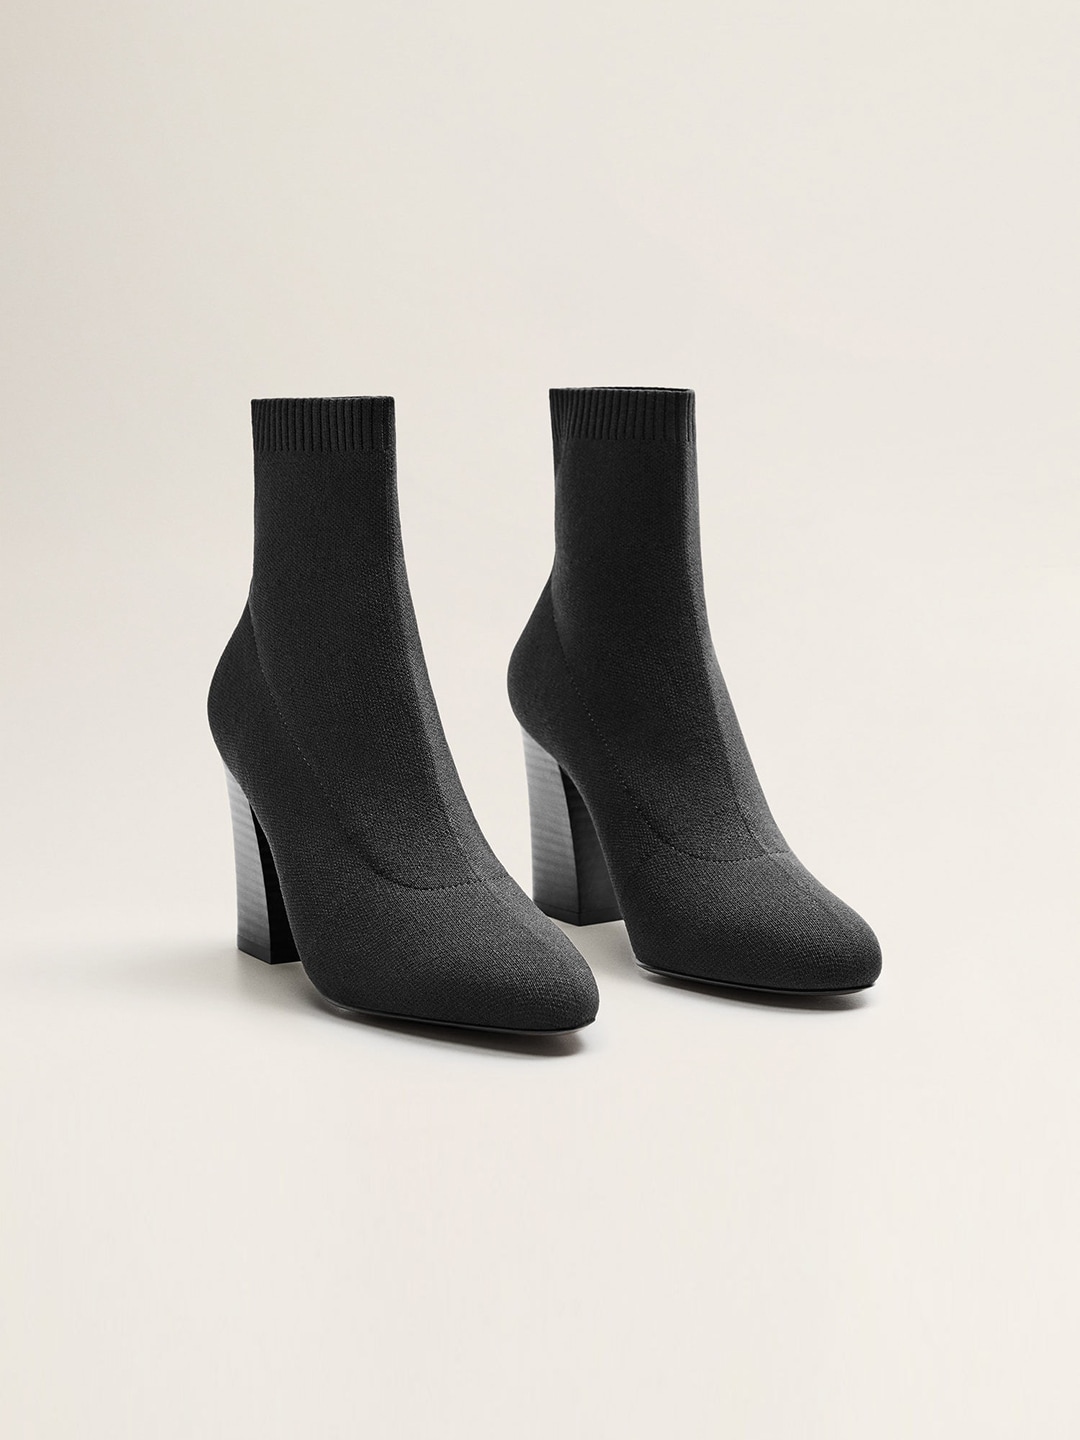 MANGO Women Black Solid Mid-Top Heeled Boots Price in India